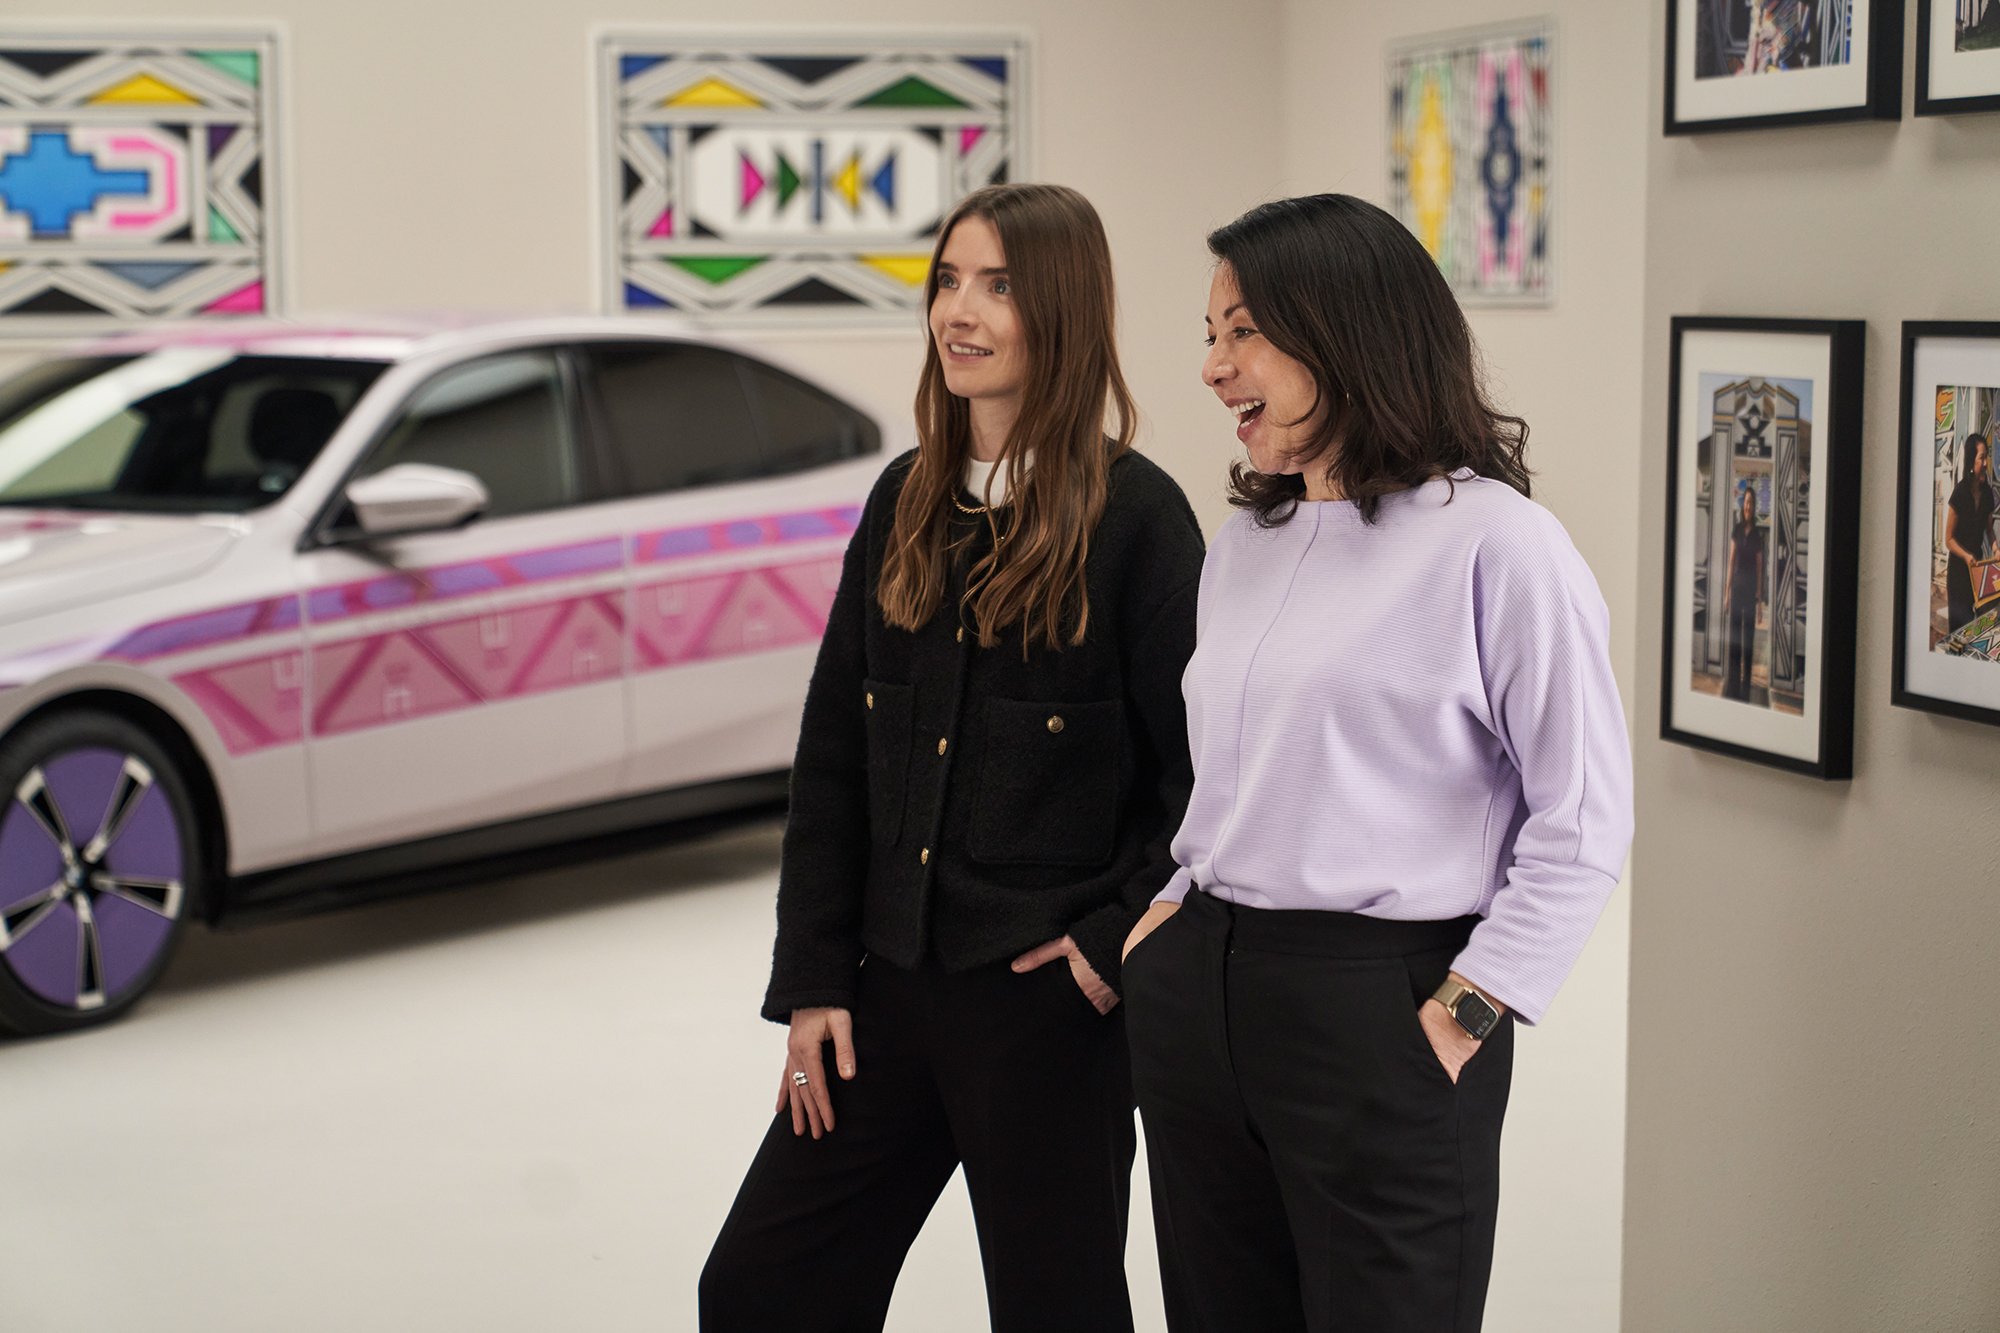 Britta Reineke, founder of ellectric in conversation with BMW Group's engineer and founder of E-Ink technlology Stella Clarke